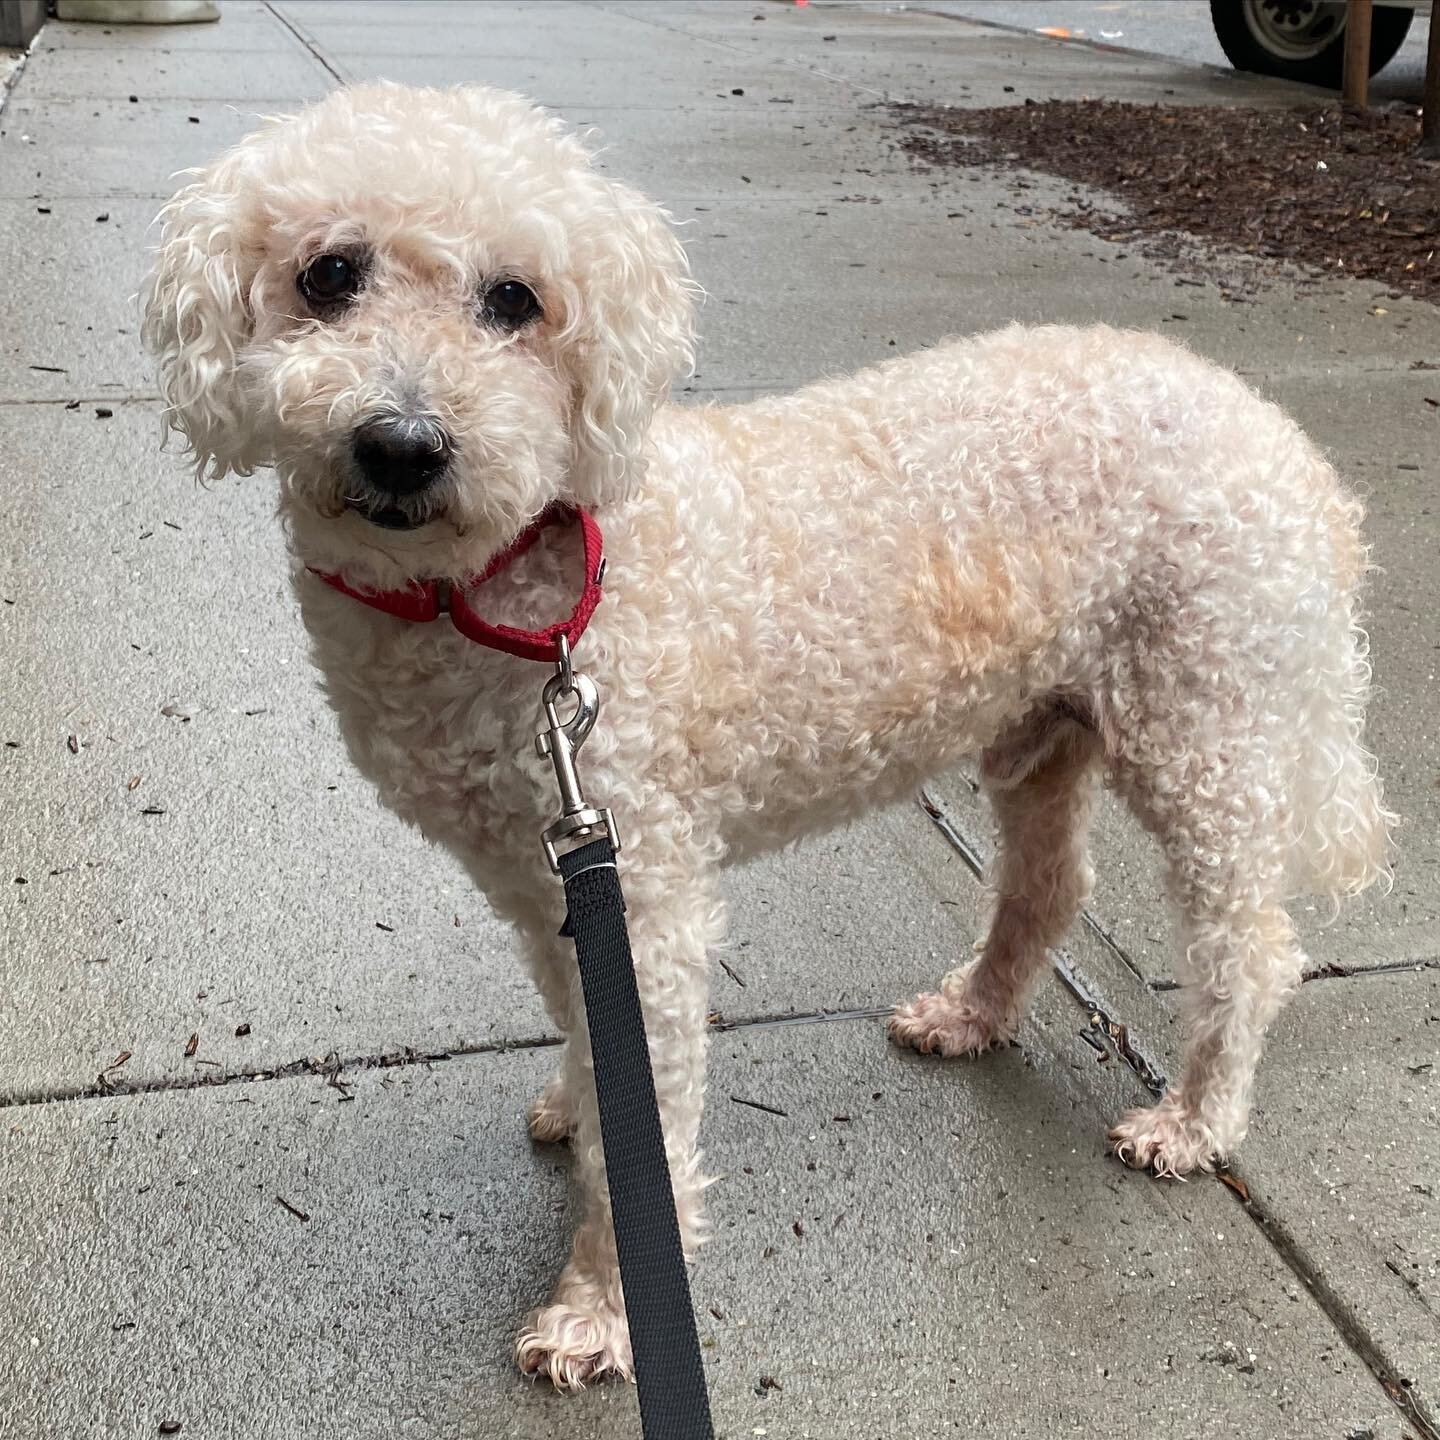 Meet Snowball! ❄️

This 9 year old, 25lb apricot poodle is as wonderful as you can get in a pup. 
He is deaf, but it hasn't impacted his life one bit except to make him that much more attentive to his humans!

His foster mom says:
&quot;Snowball is a